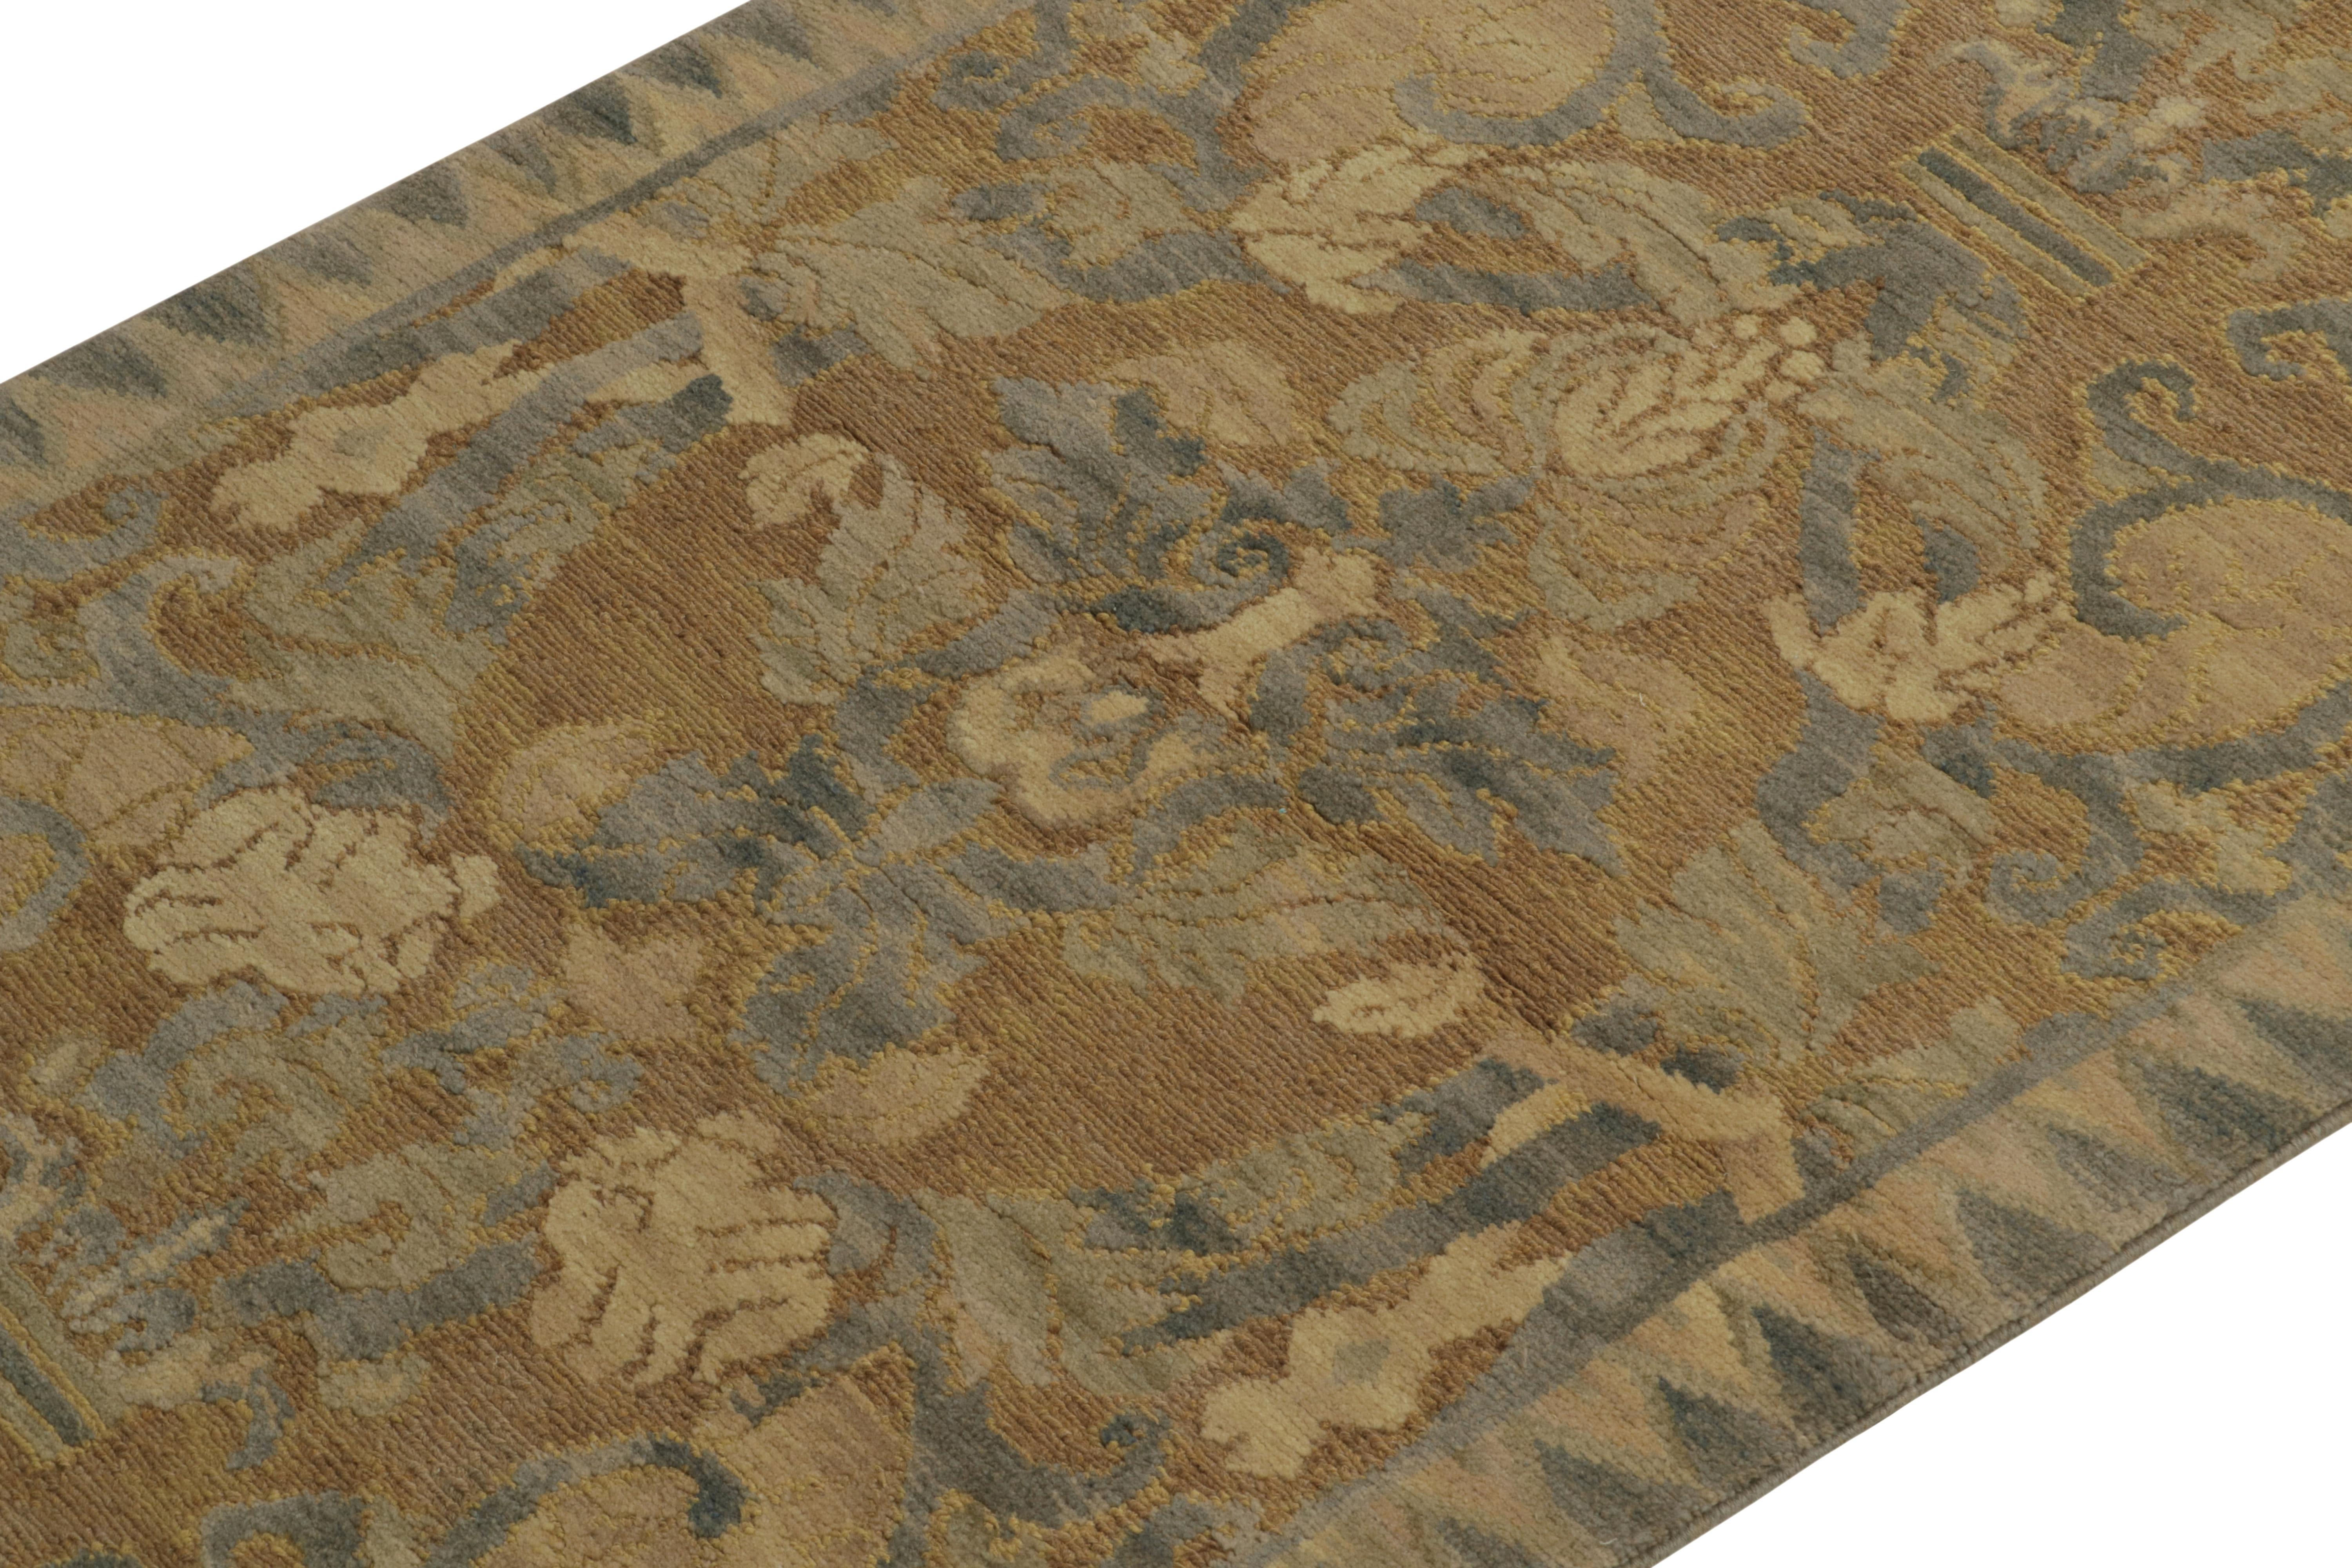 Chinese Rug & Kilim’s Arts & Crafts Style Rug in Beige-Brown and Blue Floral Patterns For Sale